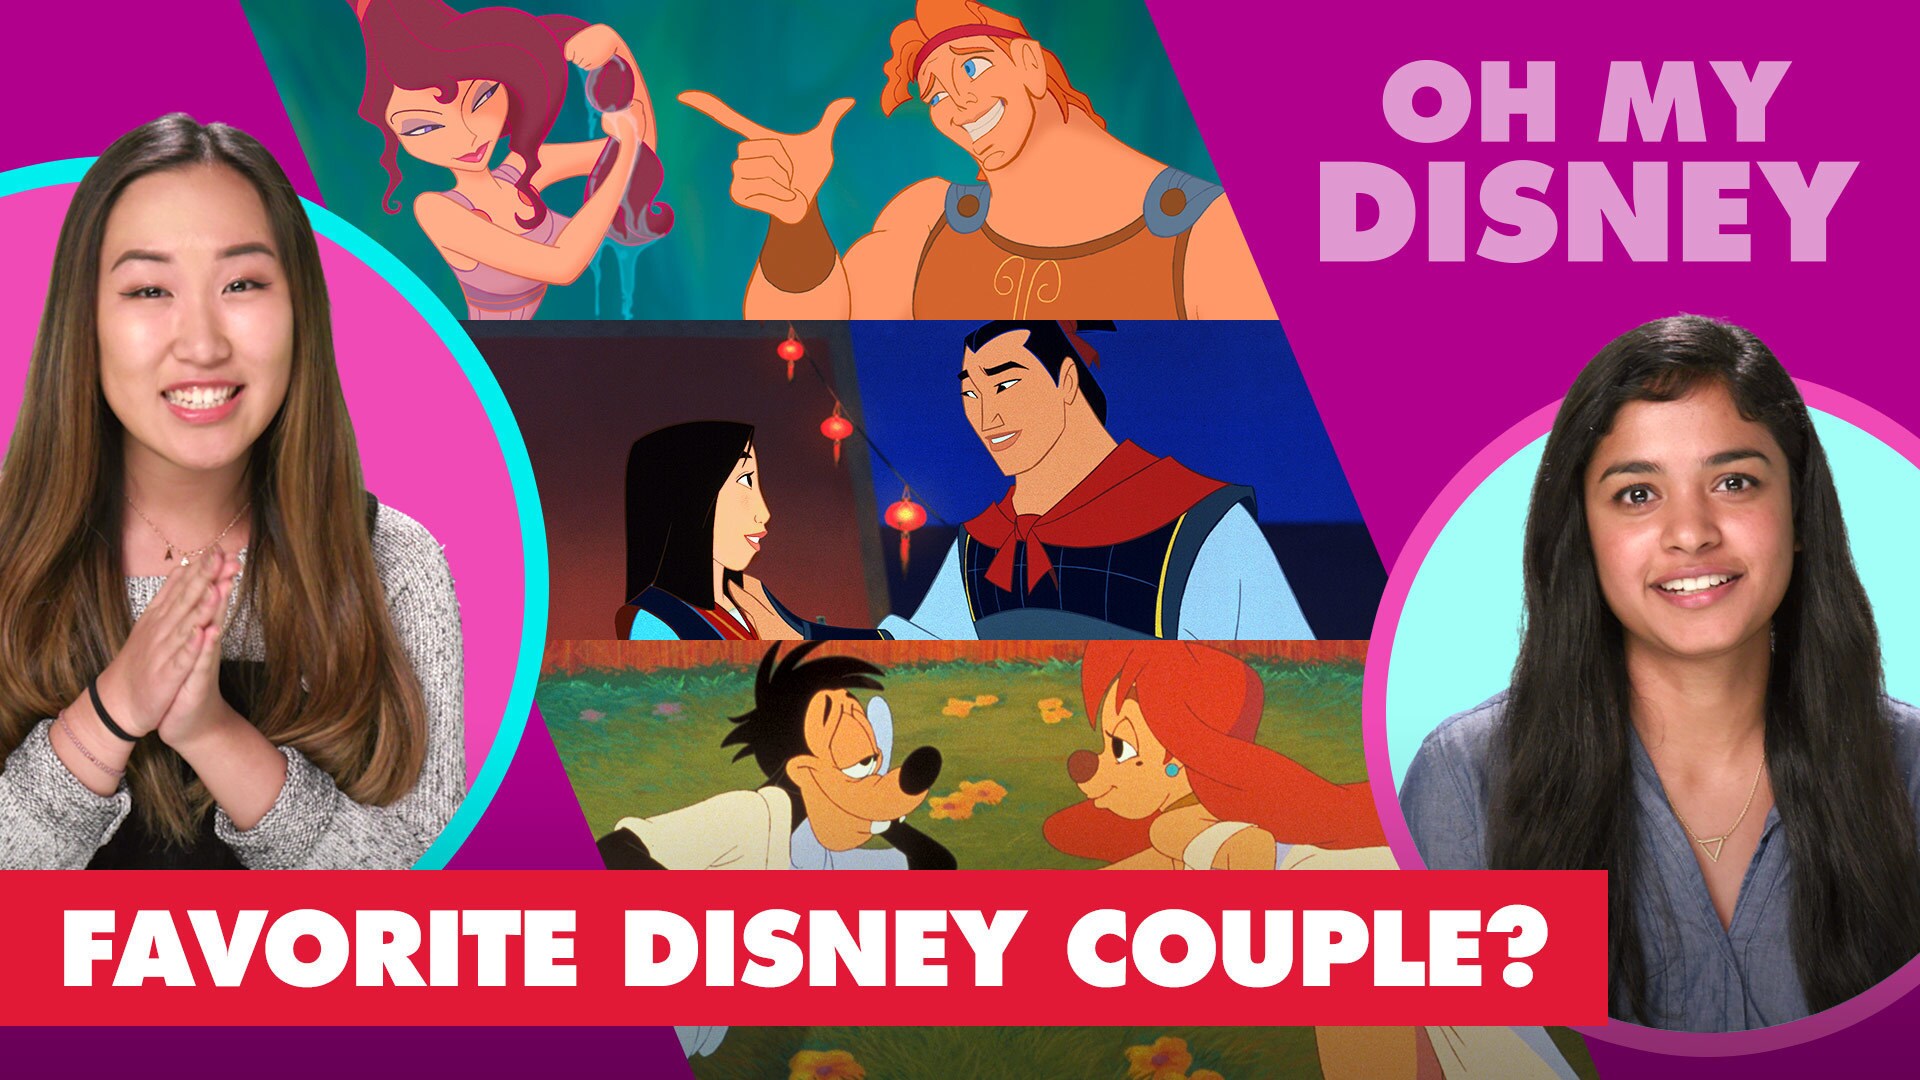 Who Is Your Favorite Disney Couple? | Let's Talk Disney by Oh My Disney